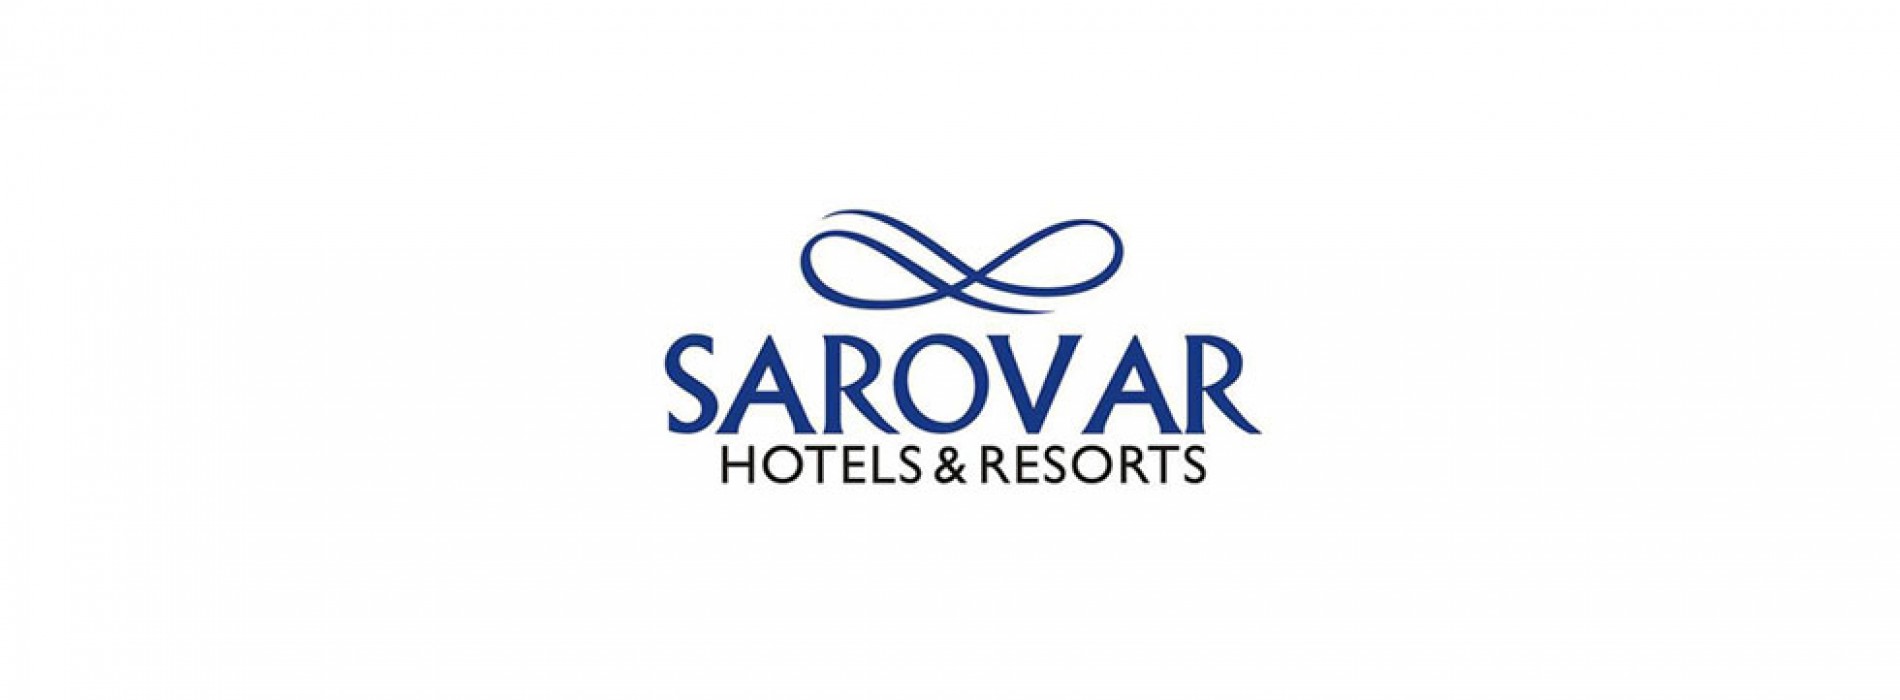 Sarovar signs two hotels in North India